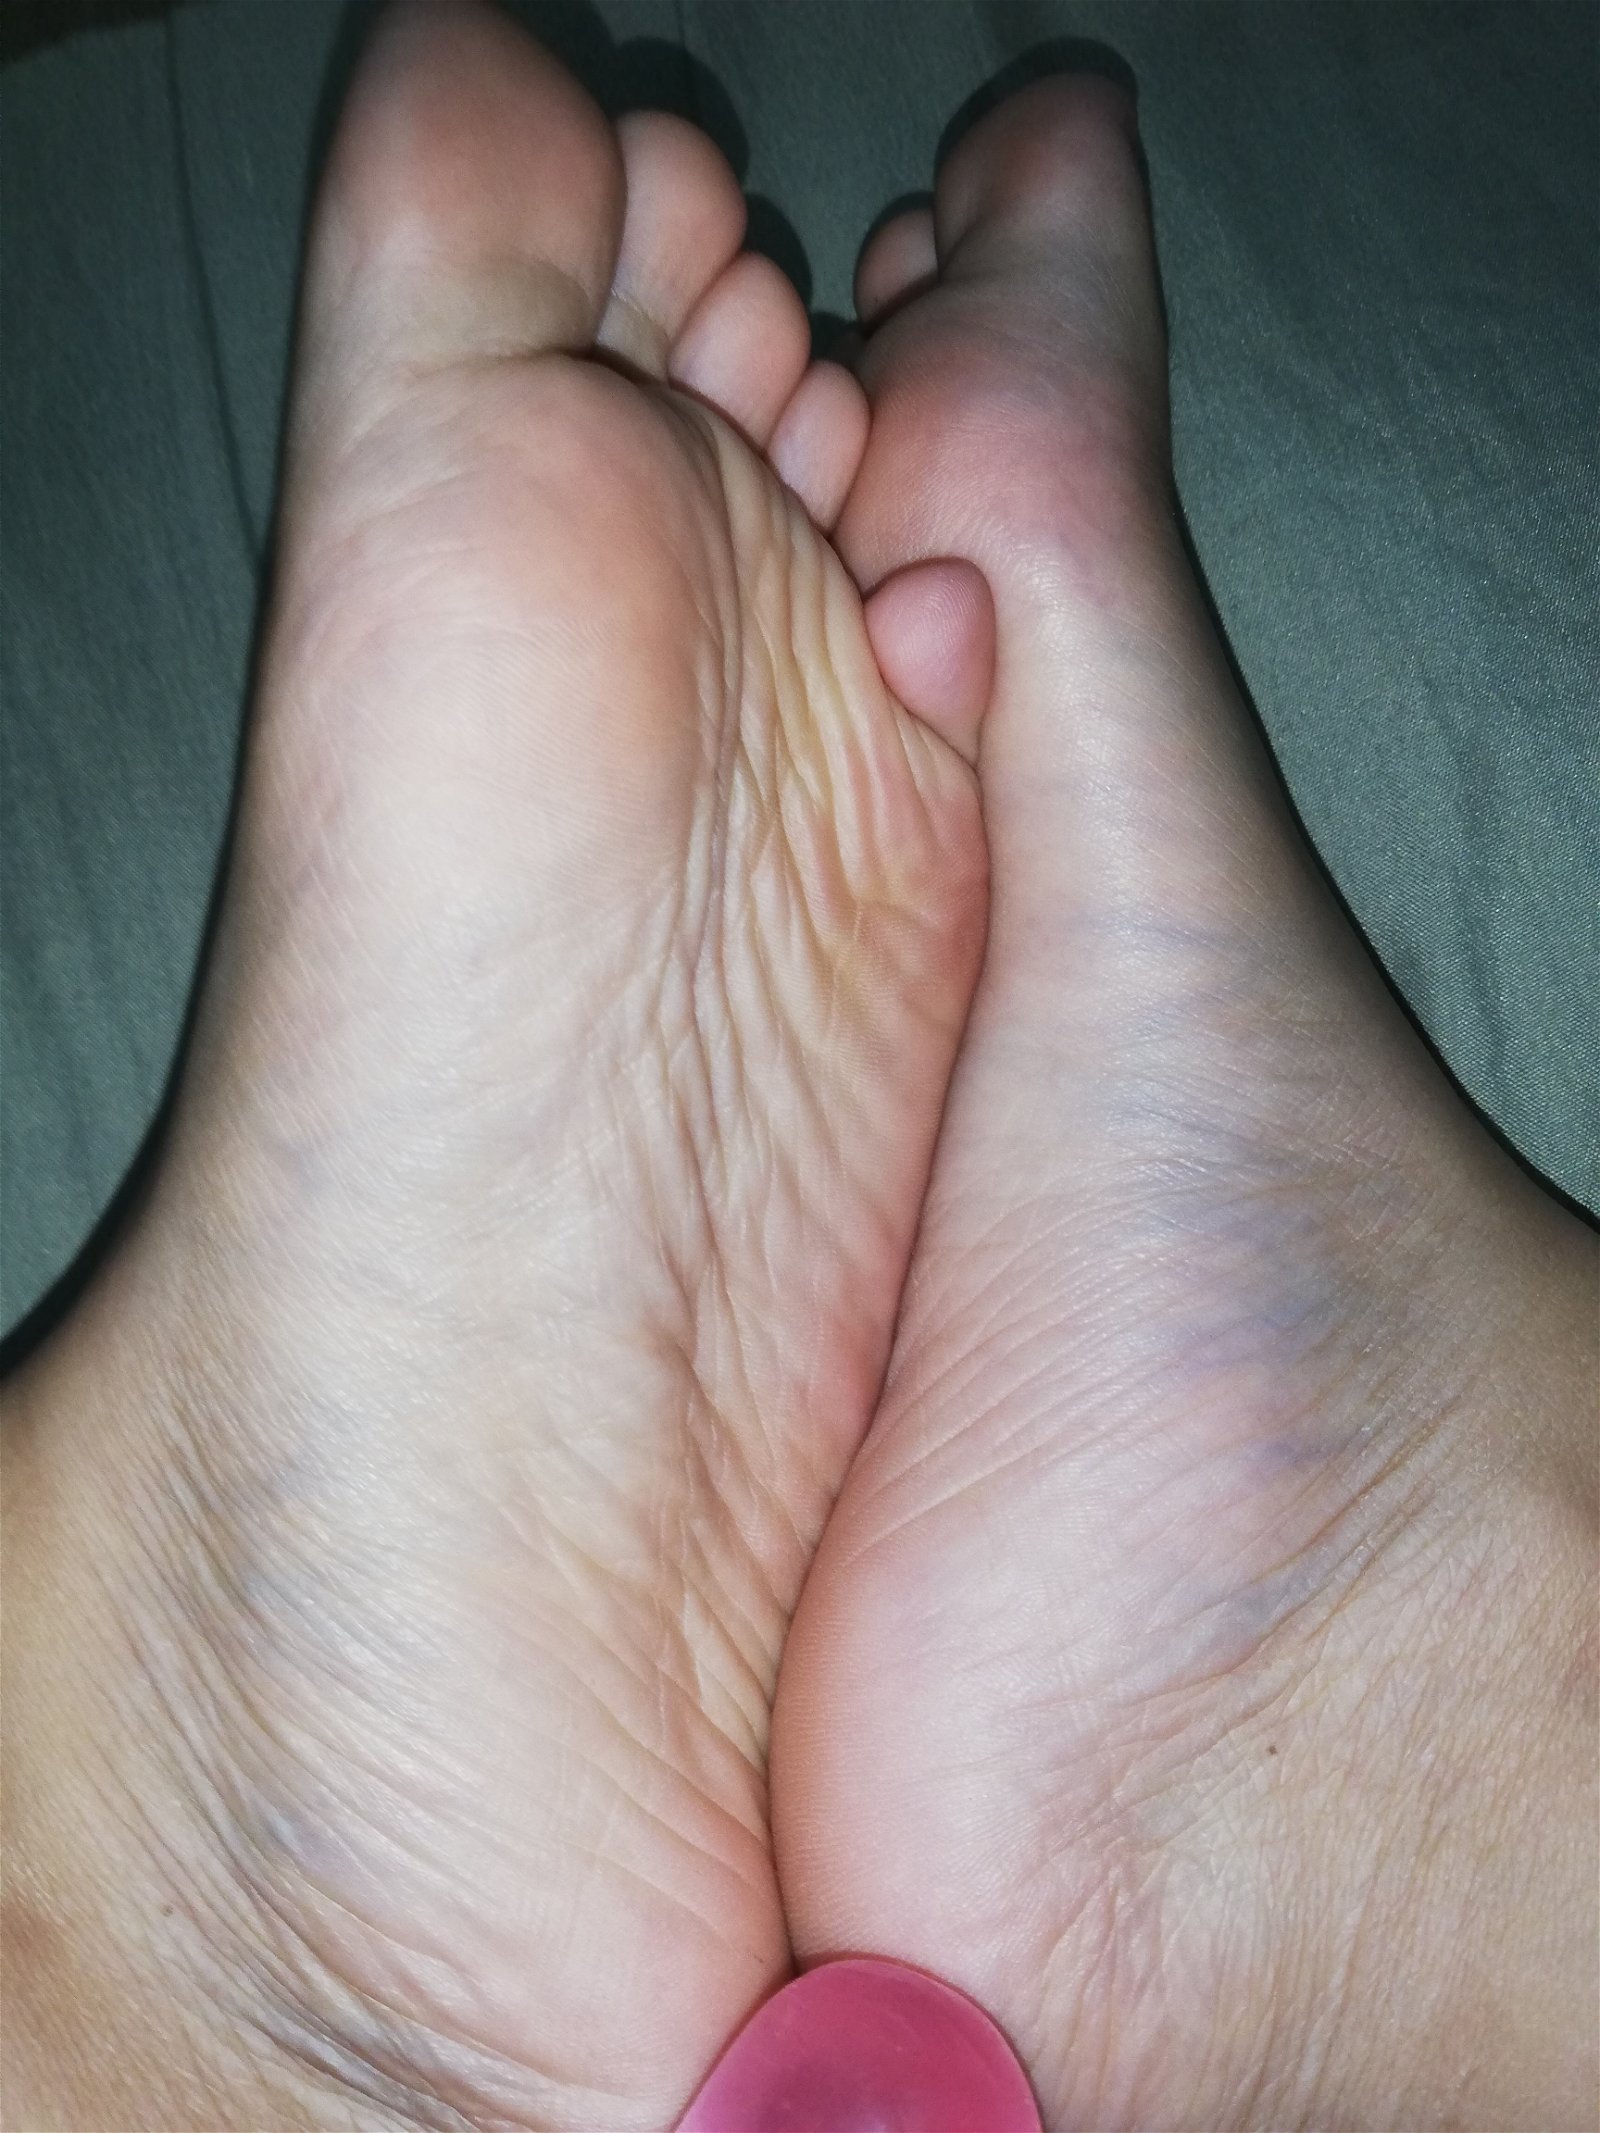 Photo by Sixfeetunder with the username @Sixfeetunder,  September 23, 2020 at 7:33 AM. The post is about the topic Foot Worship